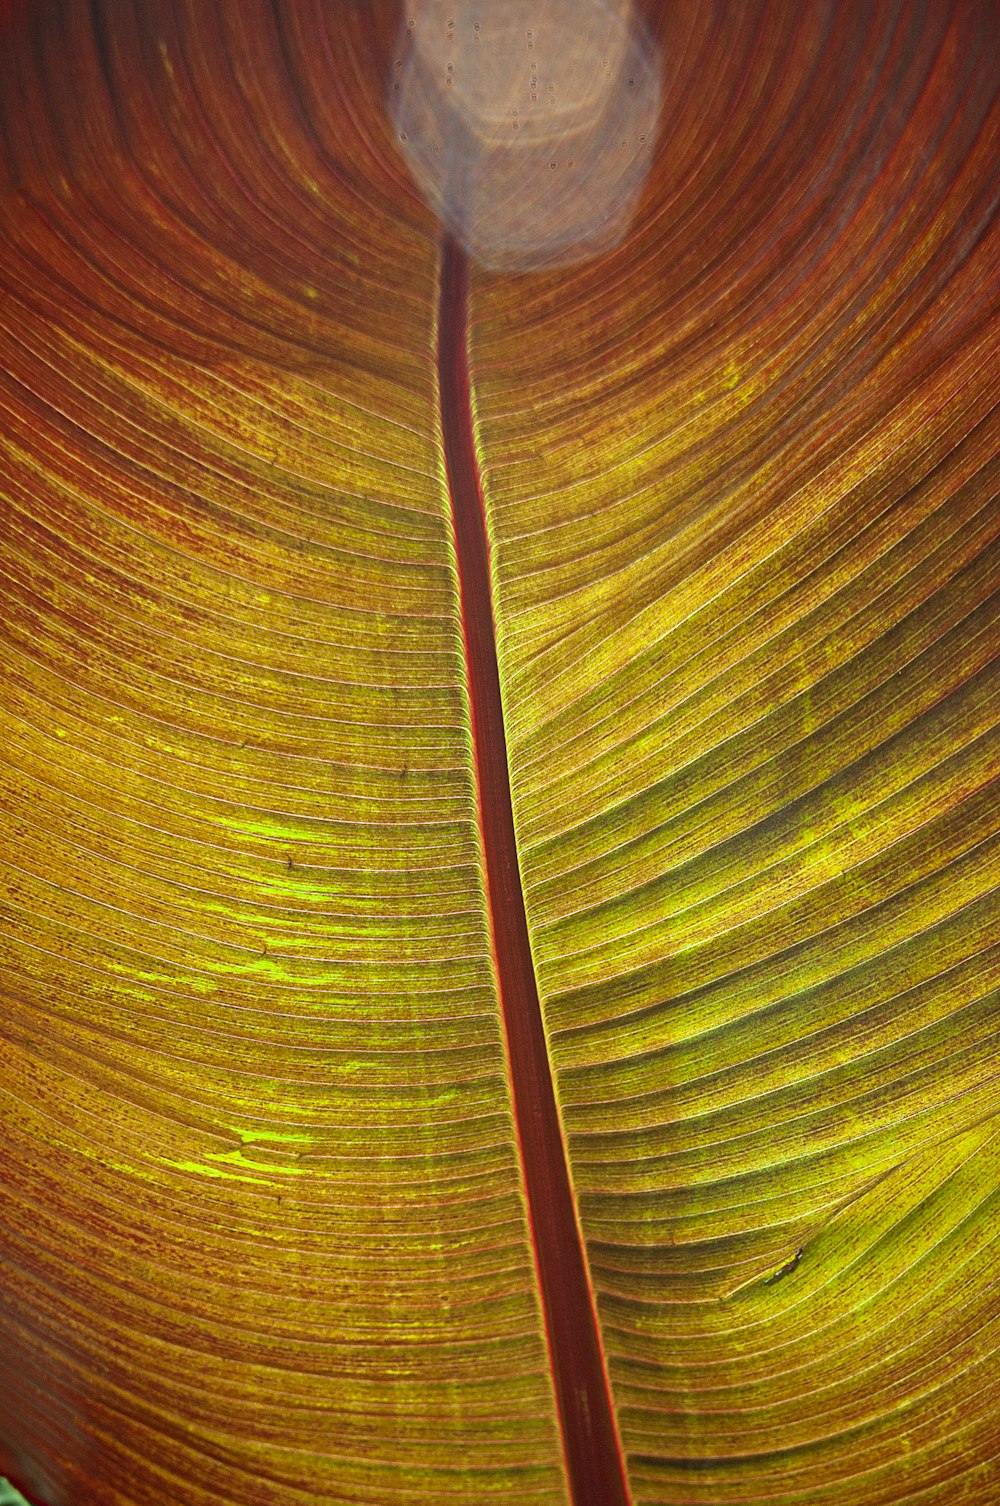 a close up of a leaf with a blurry background